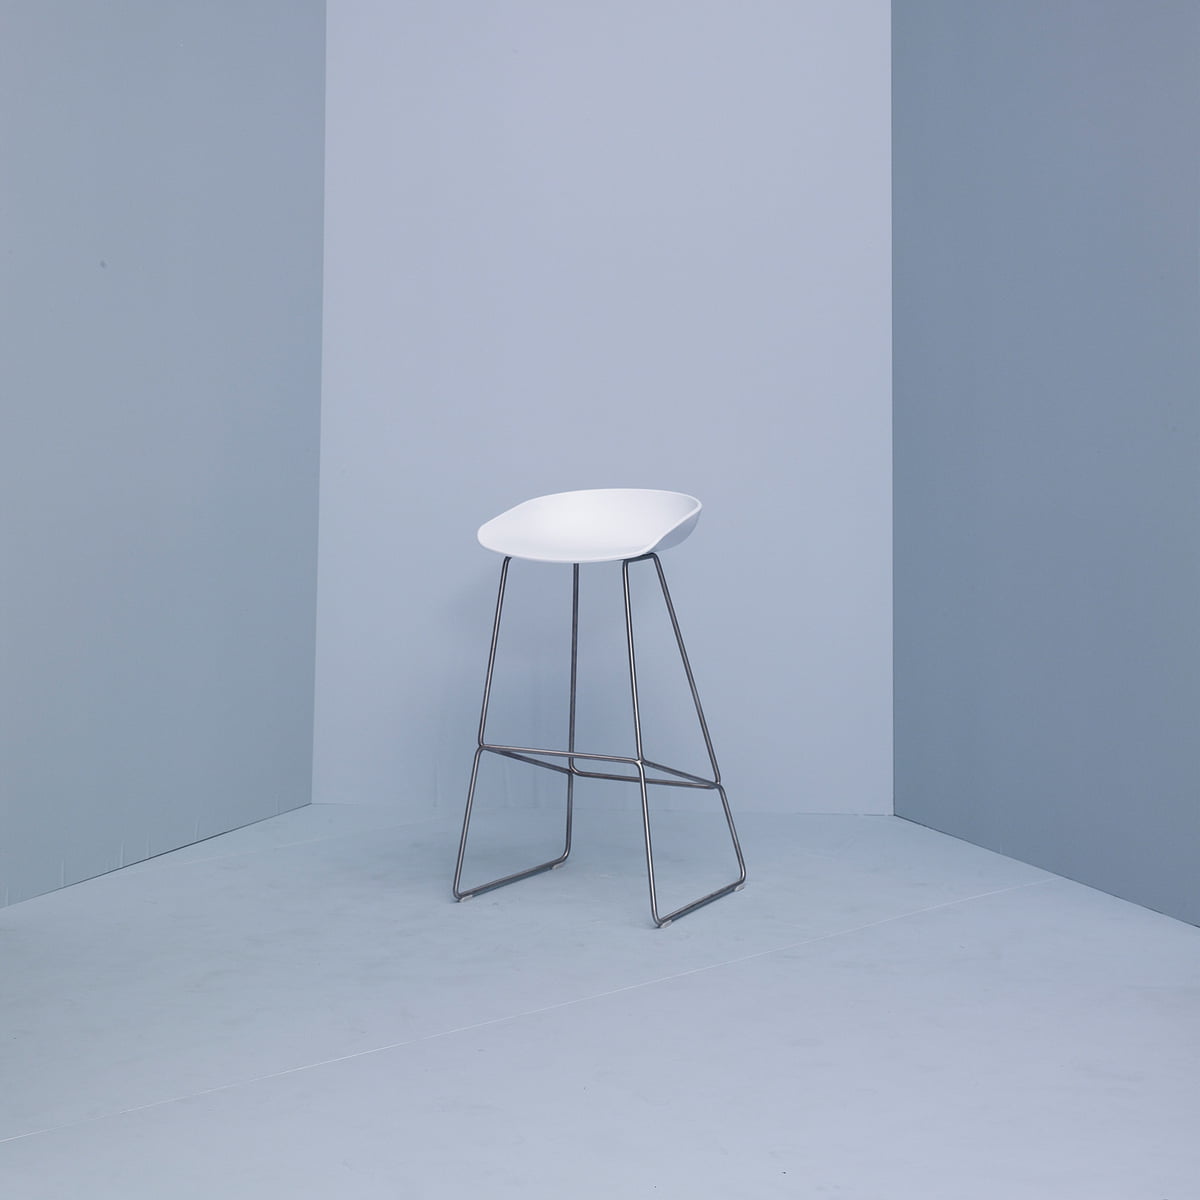 Særlig Stol Begge Hay - About A Stool AAS 38 | Connox